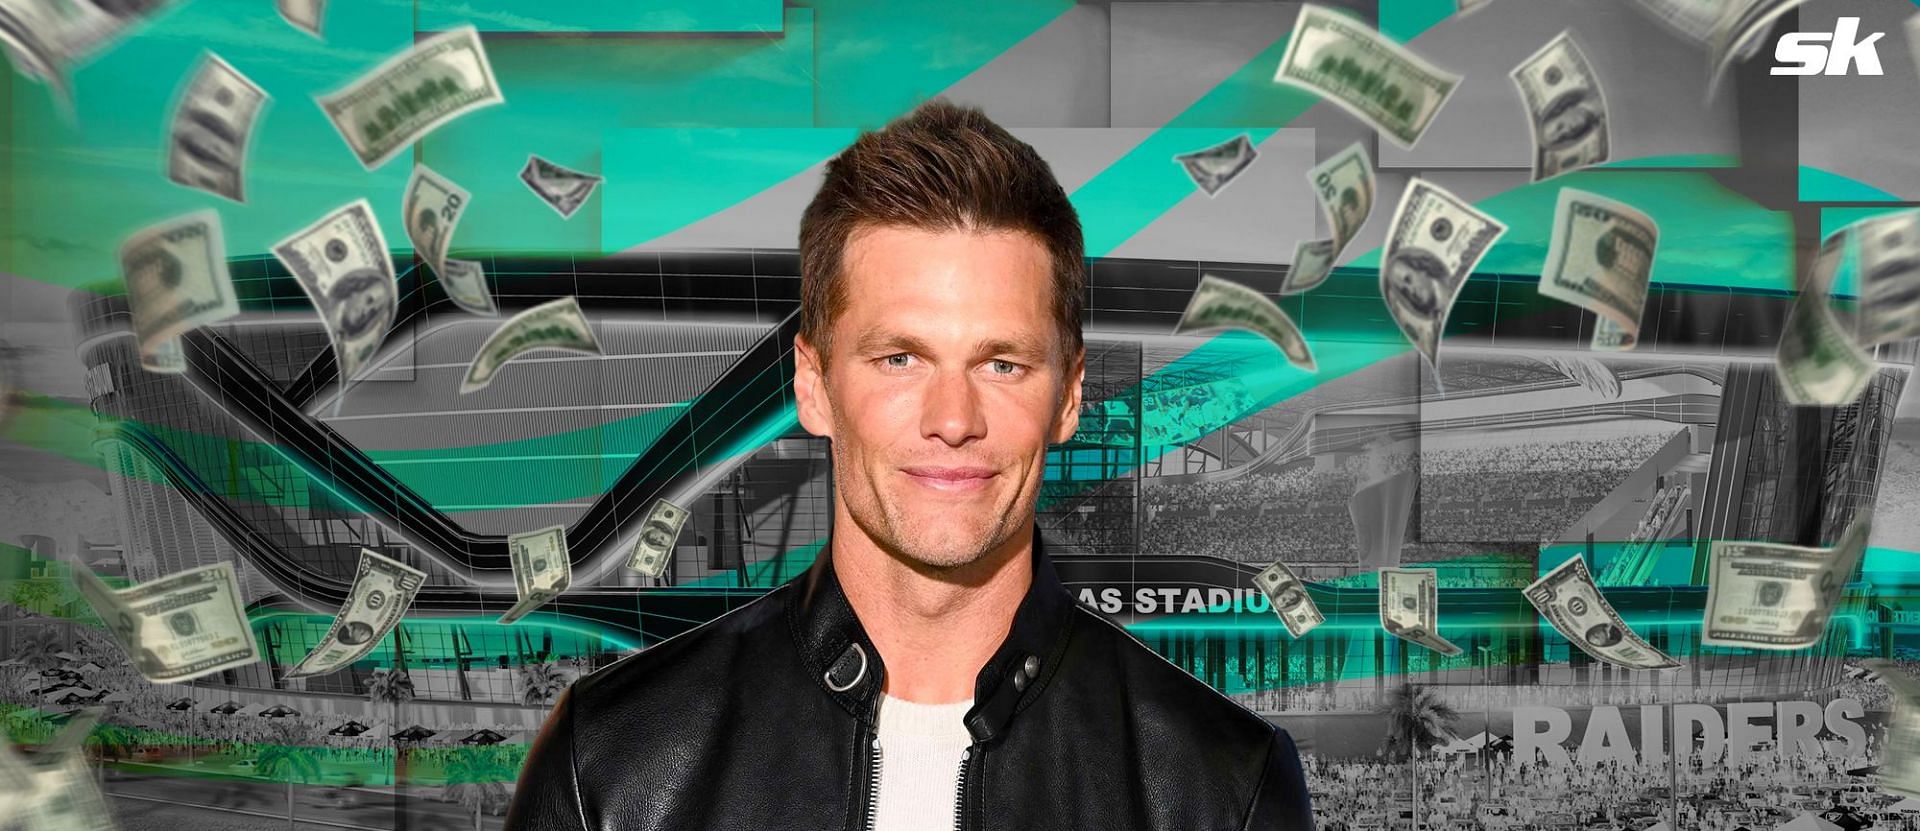 FL insider underlines why Tom Brady&rsquo;s discounted $175,000,000 Raiders ownership could &lsquo;rub owners the wrong way&rsquo;